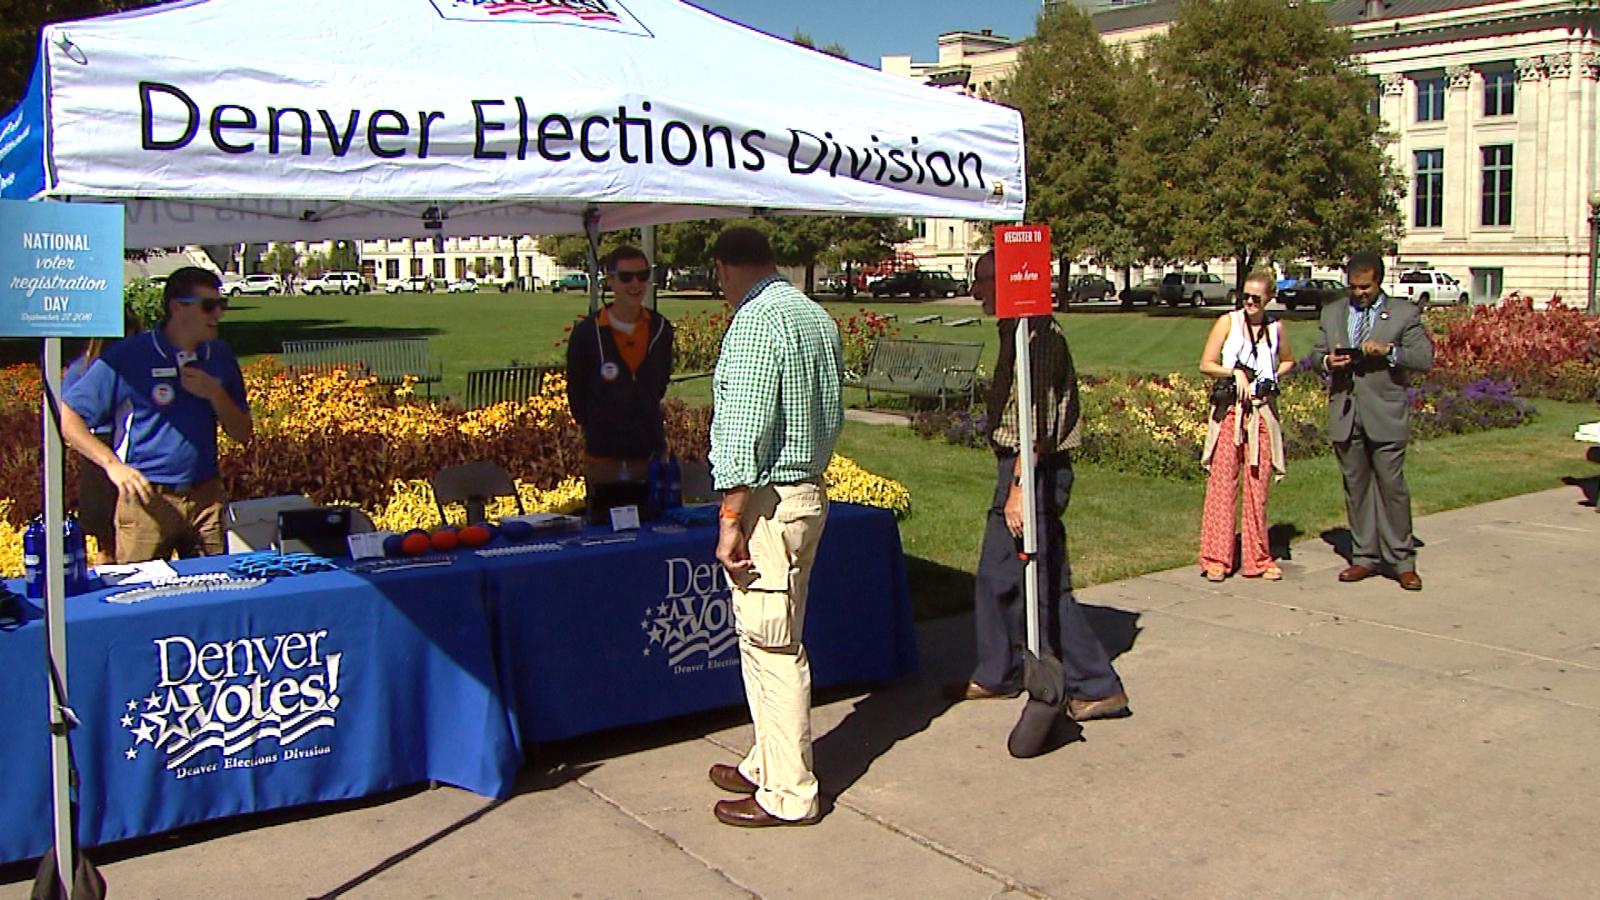 A tent in Civic Center Park (credit: CBS)